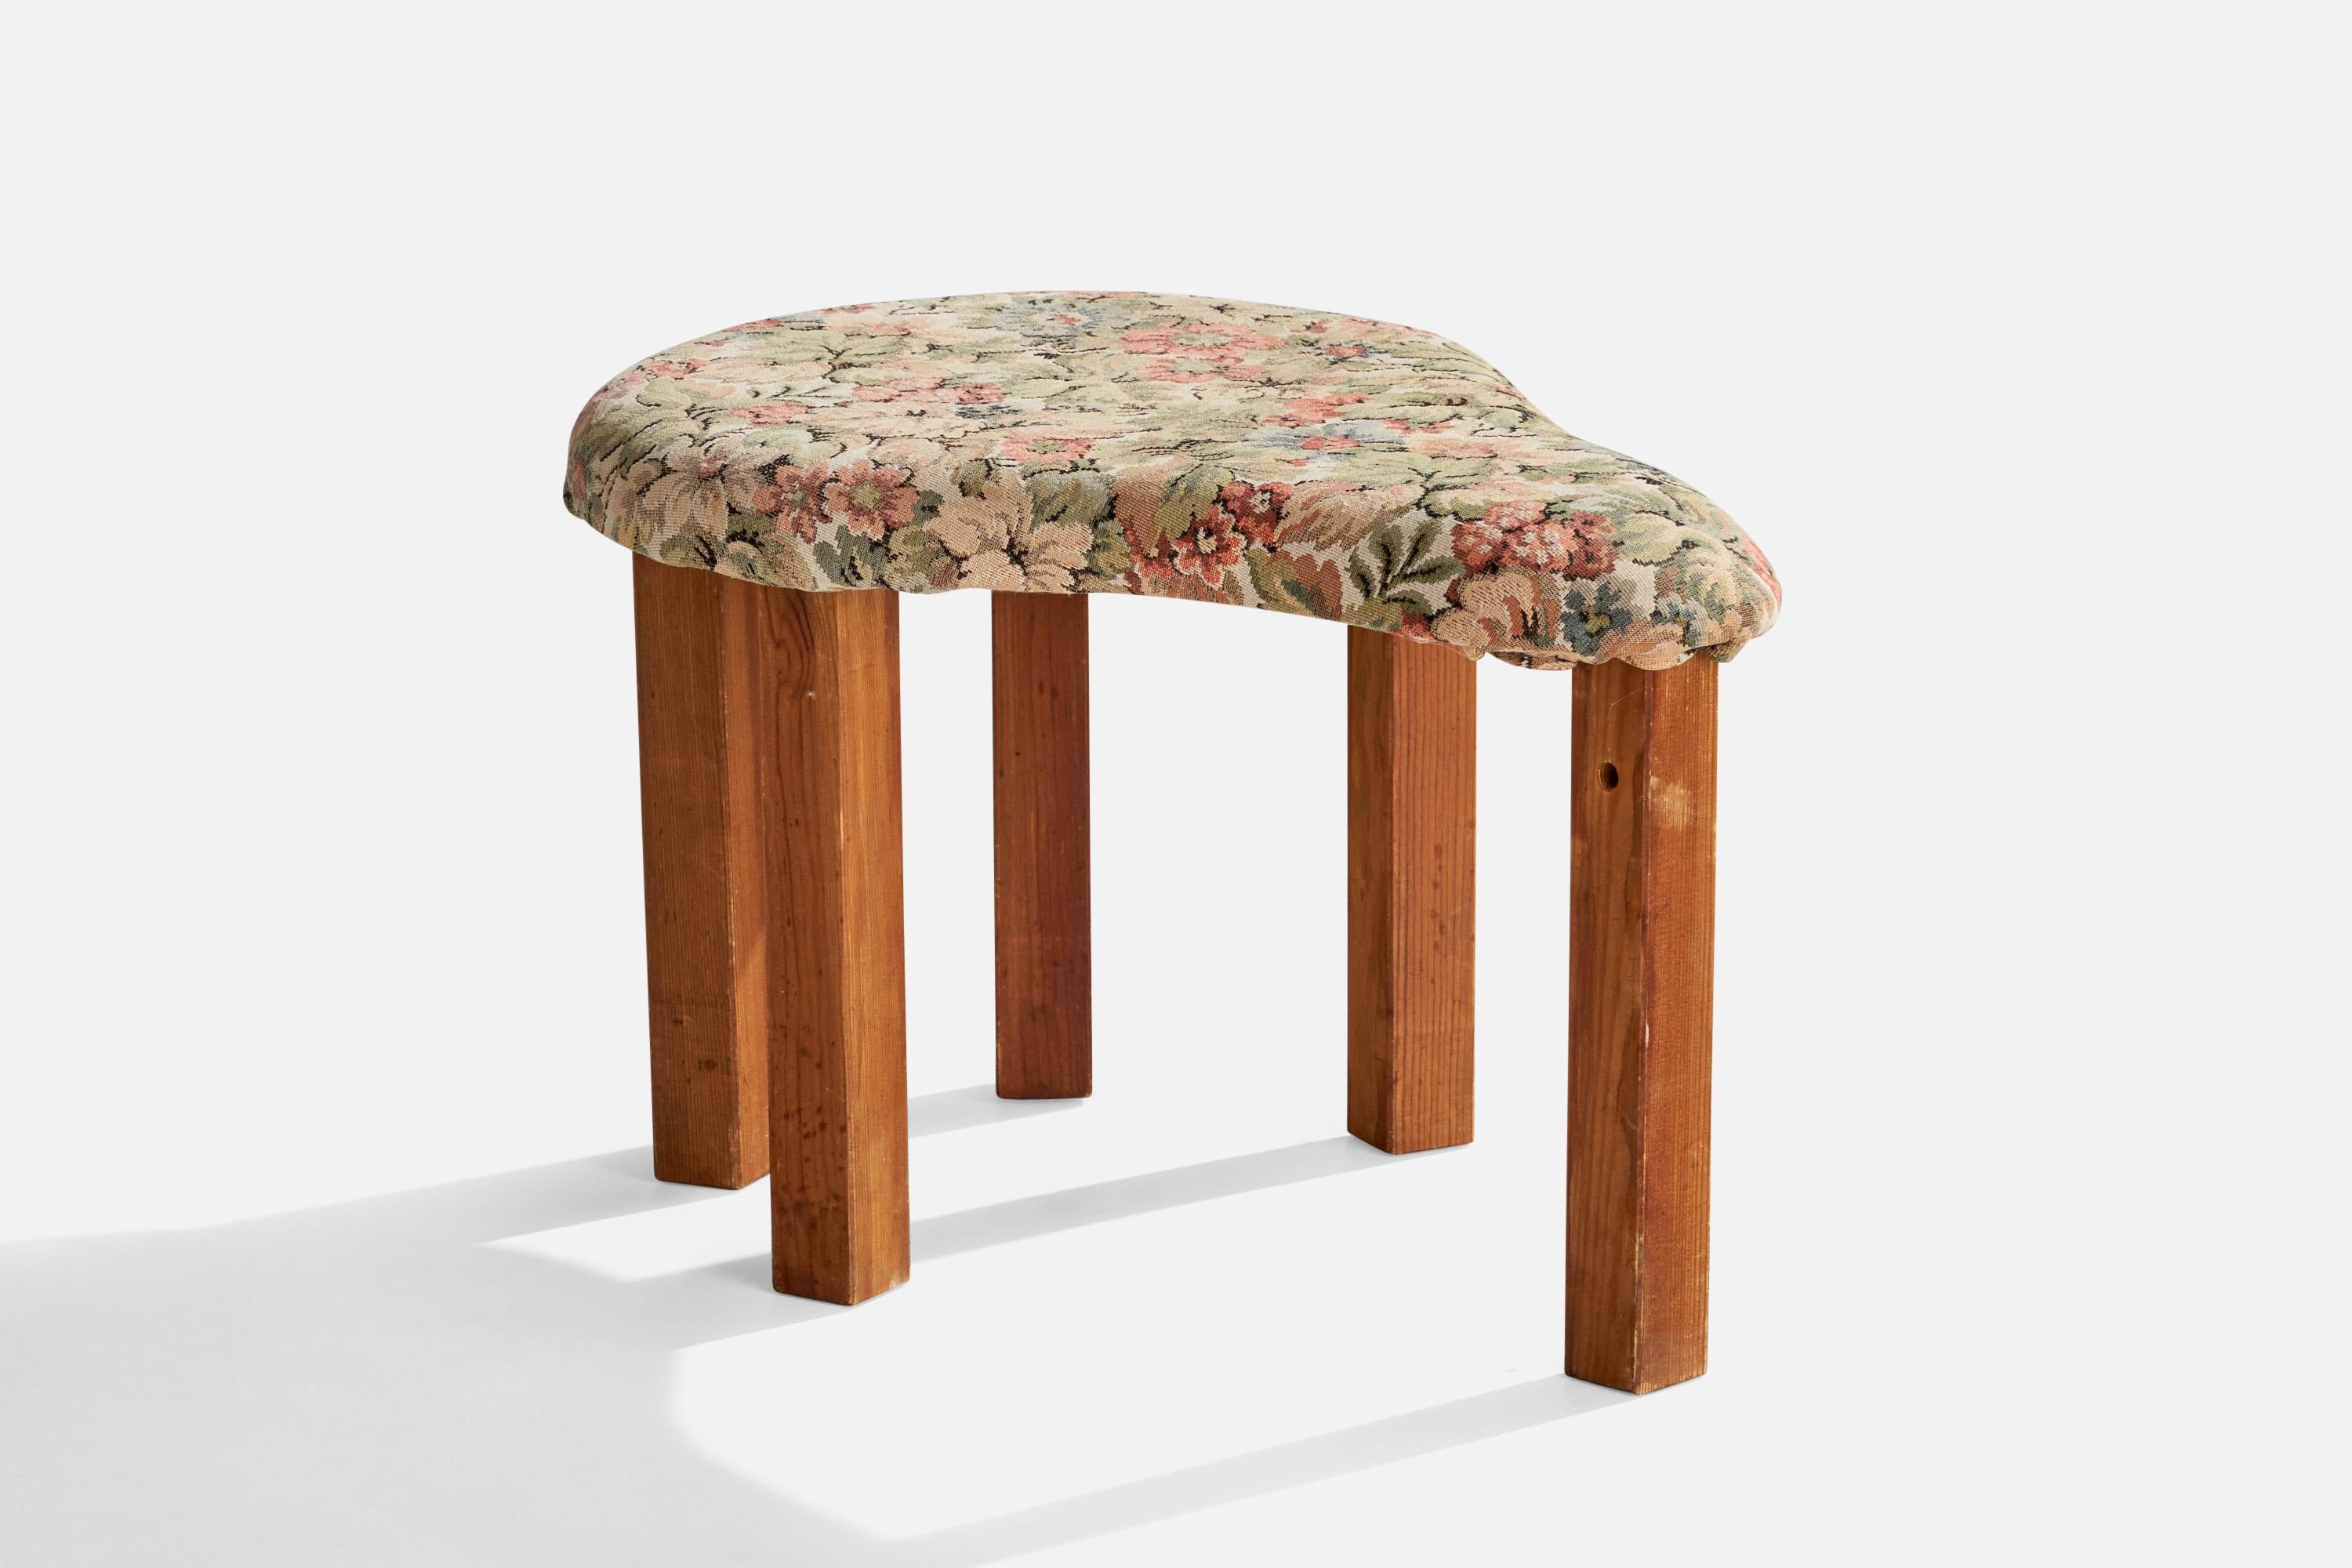 A pine and floral fabric stool designed and produced by Stig Wärnell, Nyköping, Sweden, 1970s.

seat height 13”. 